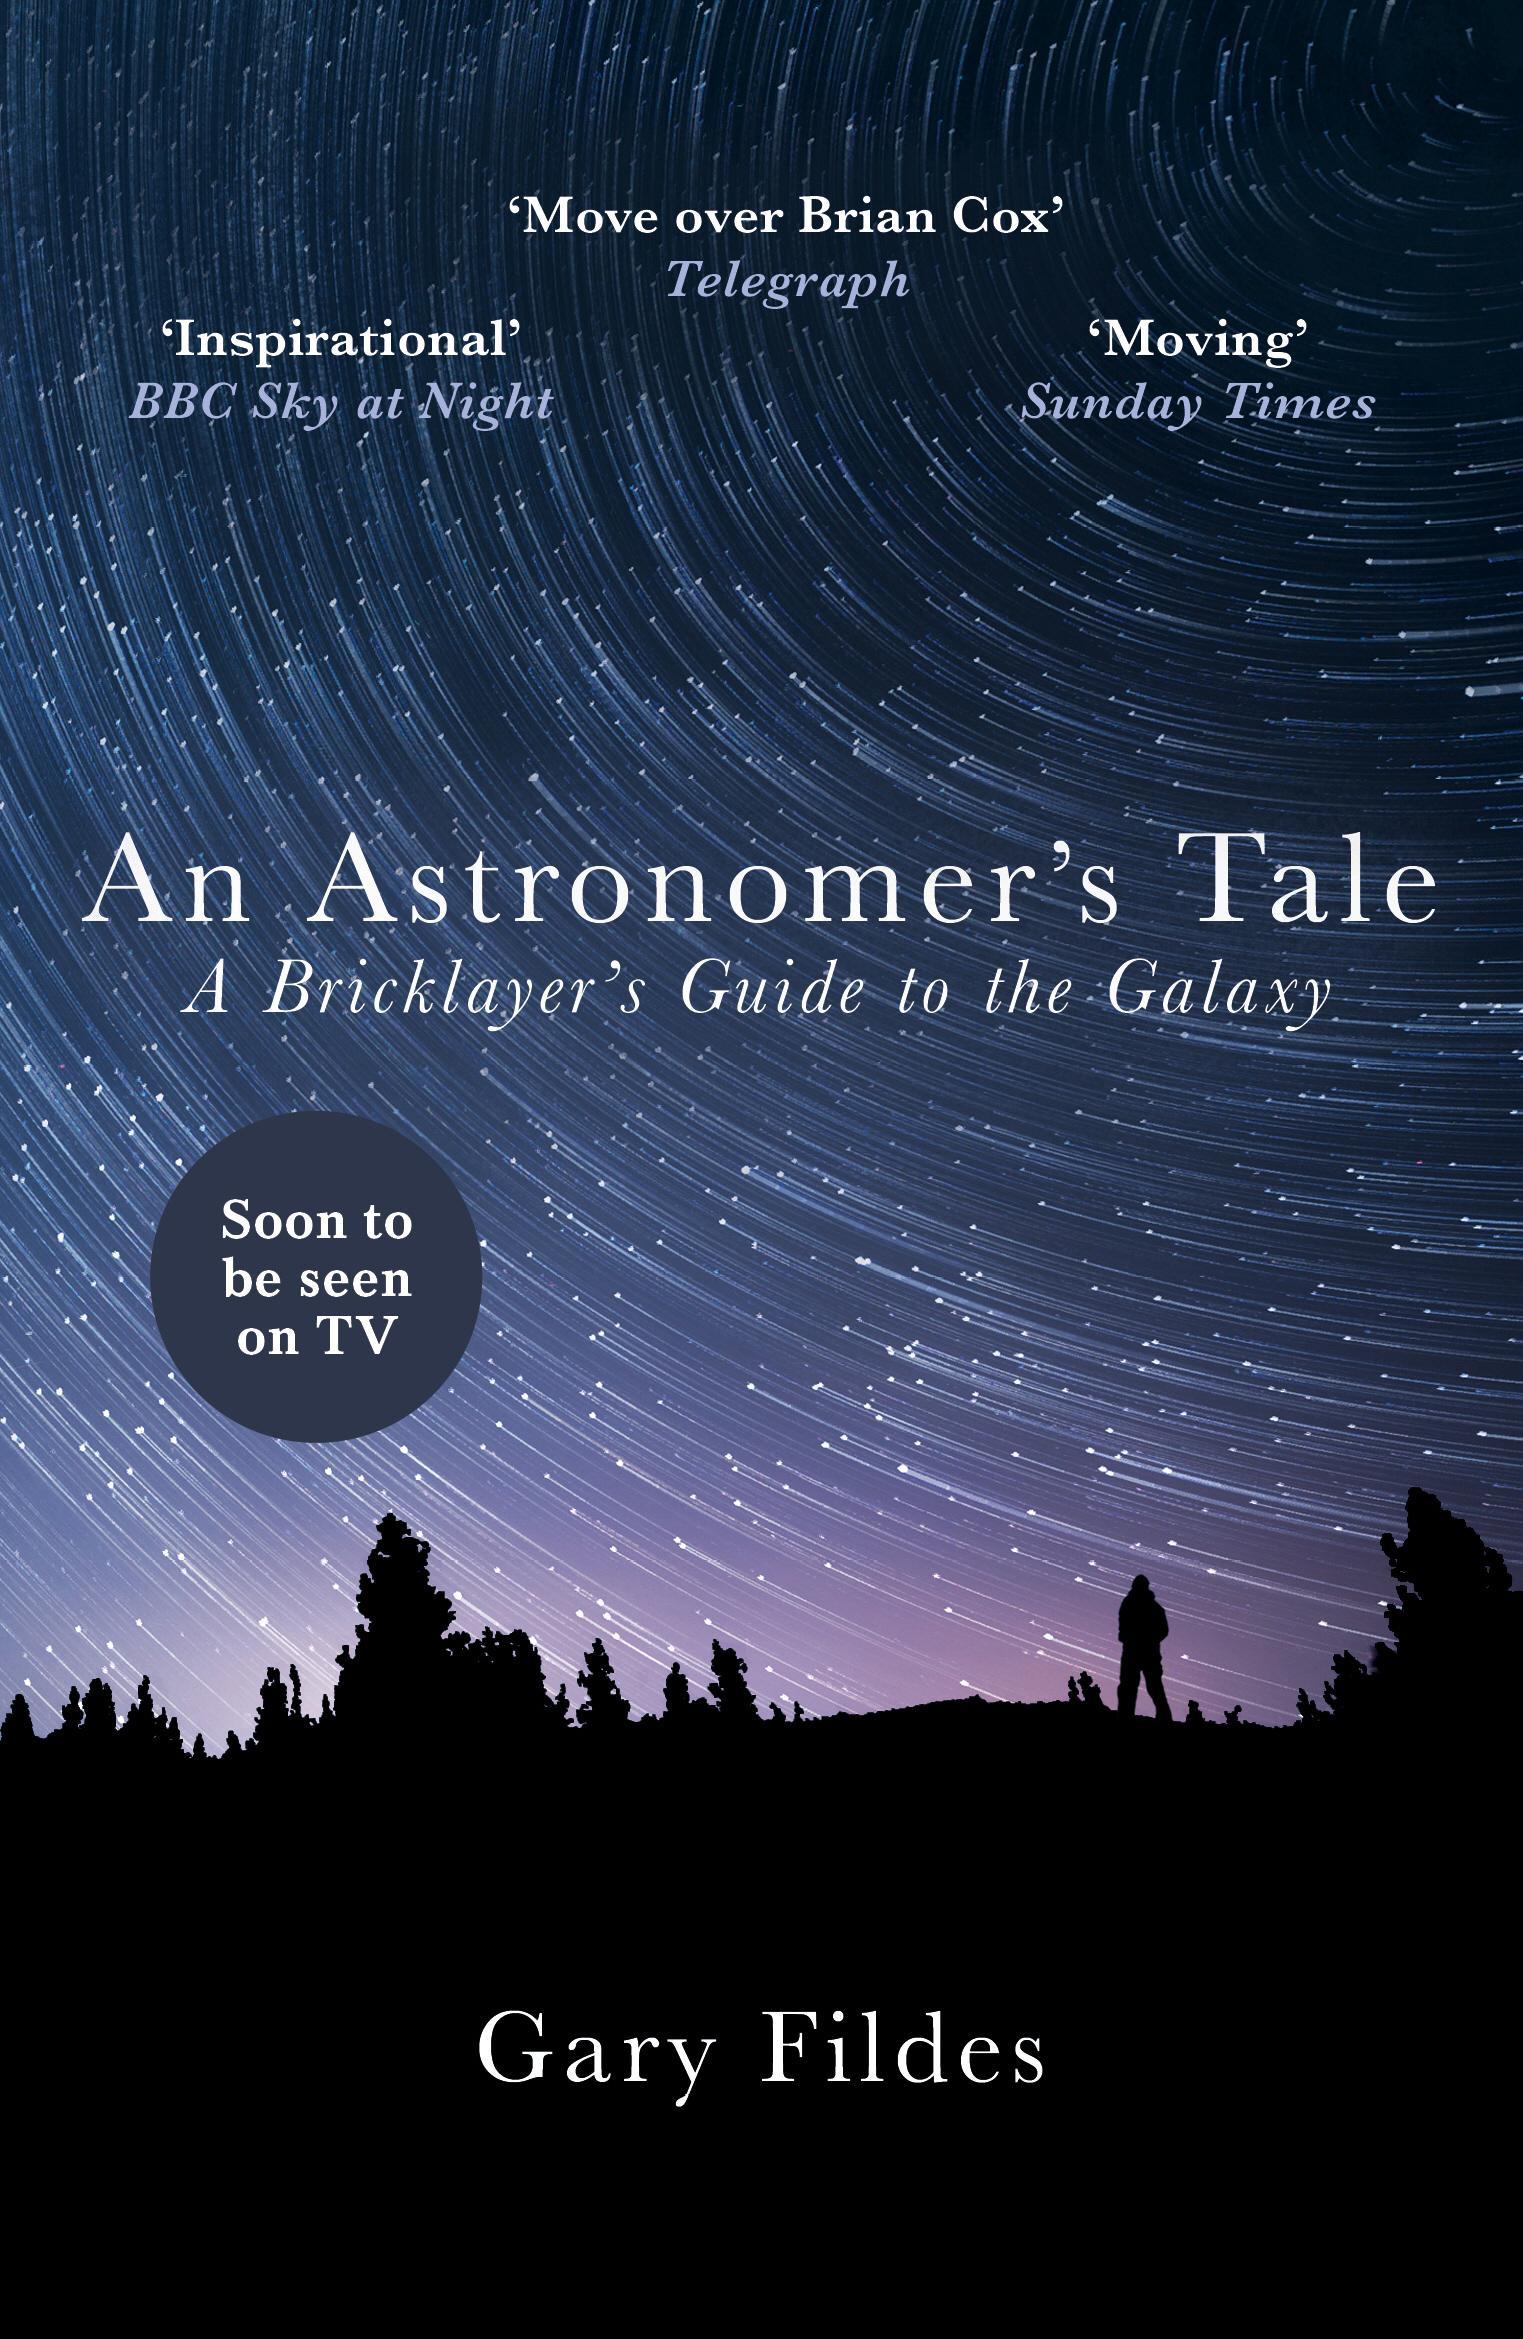 Astronomer's Tale - Gary Fildes